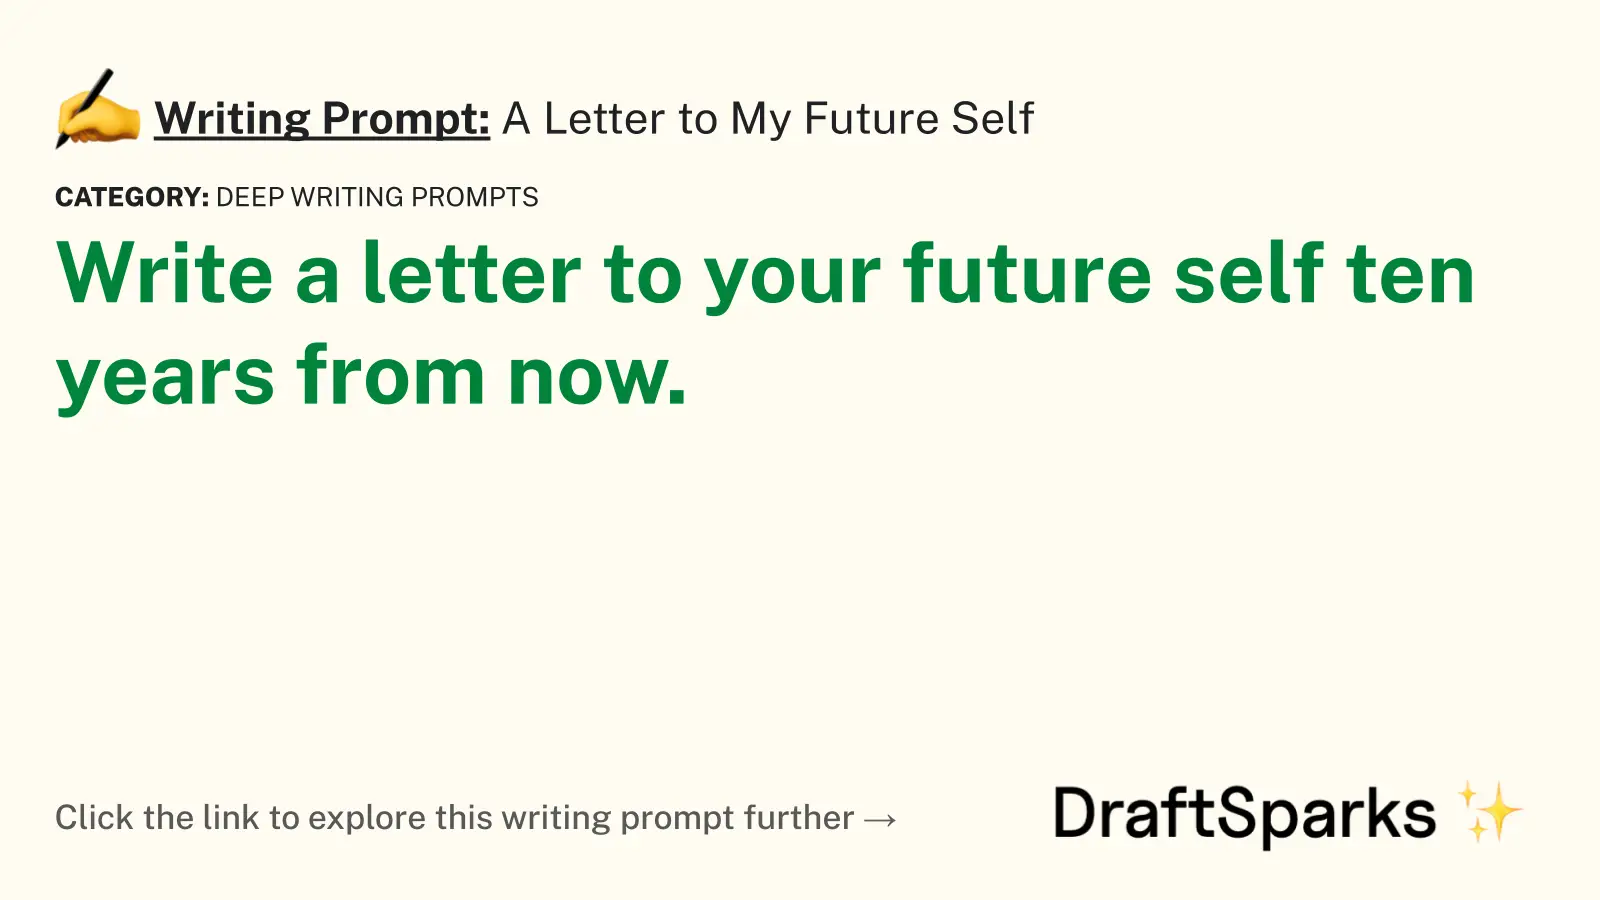 A Letter to My Future Self